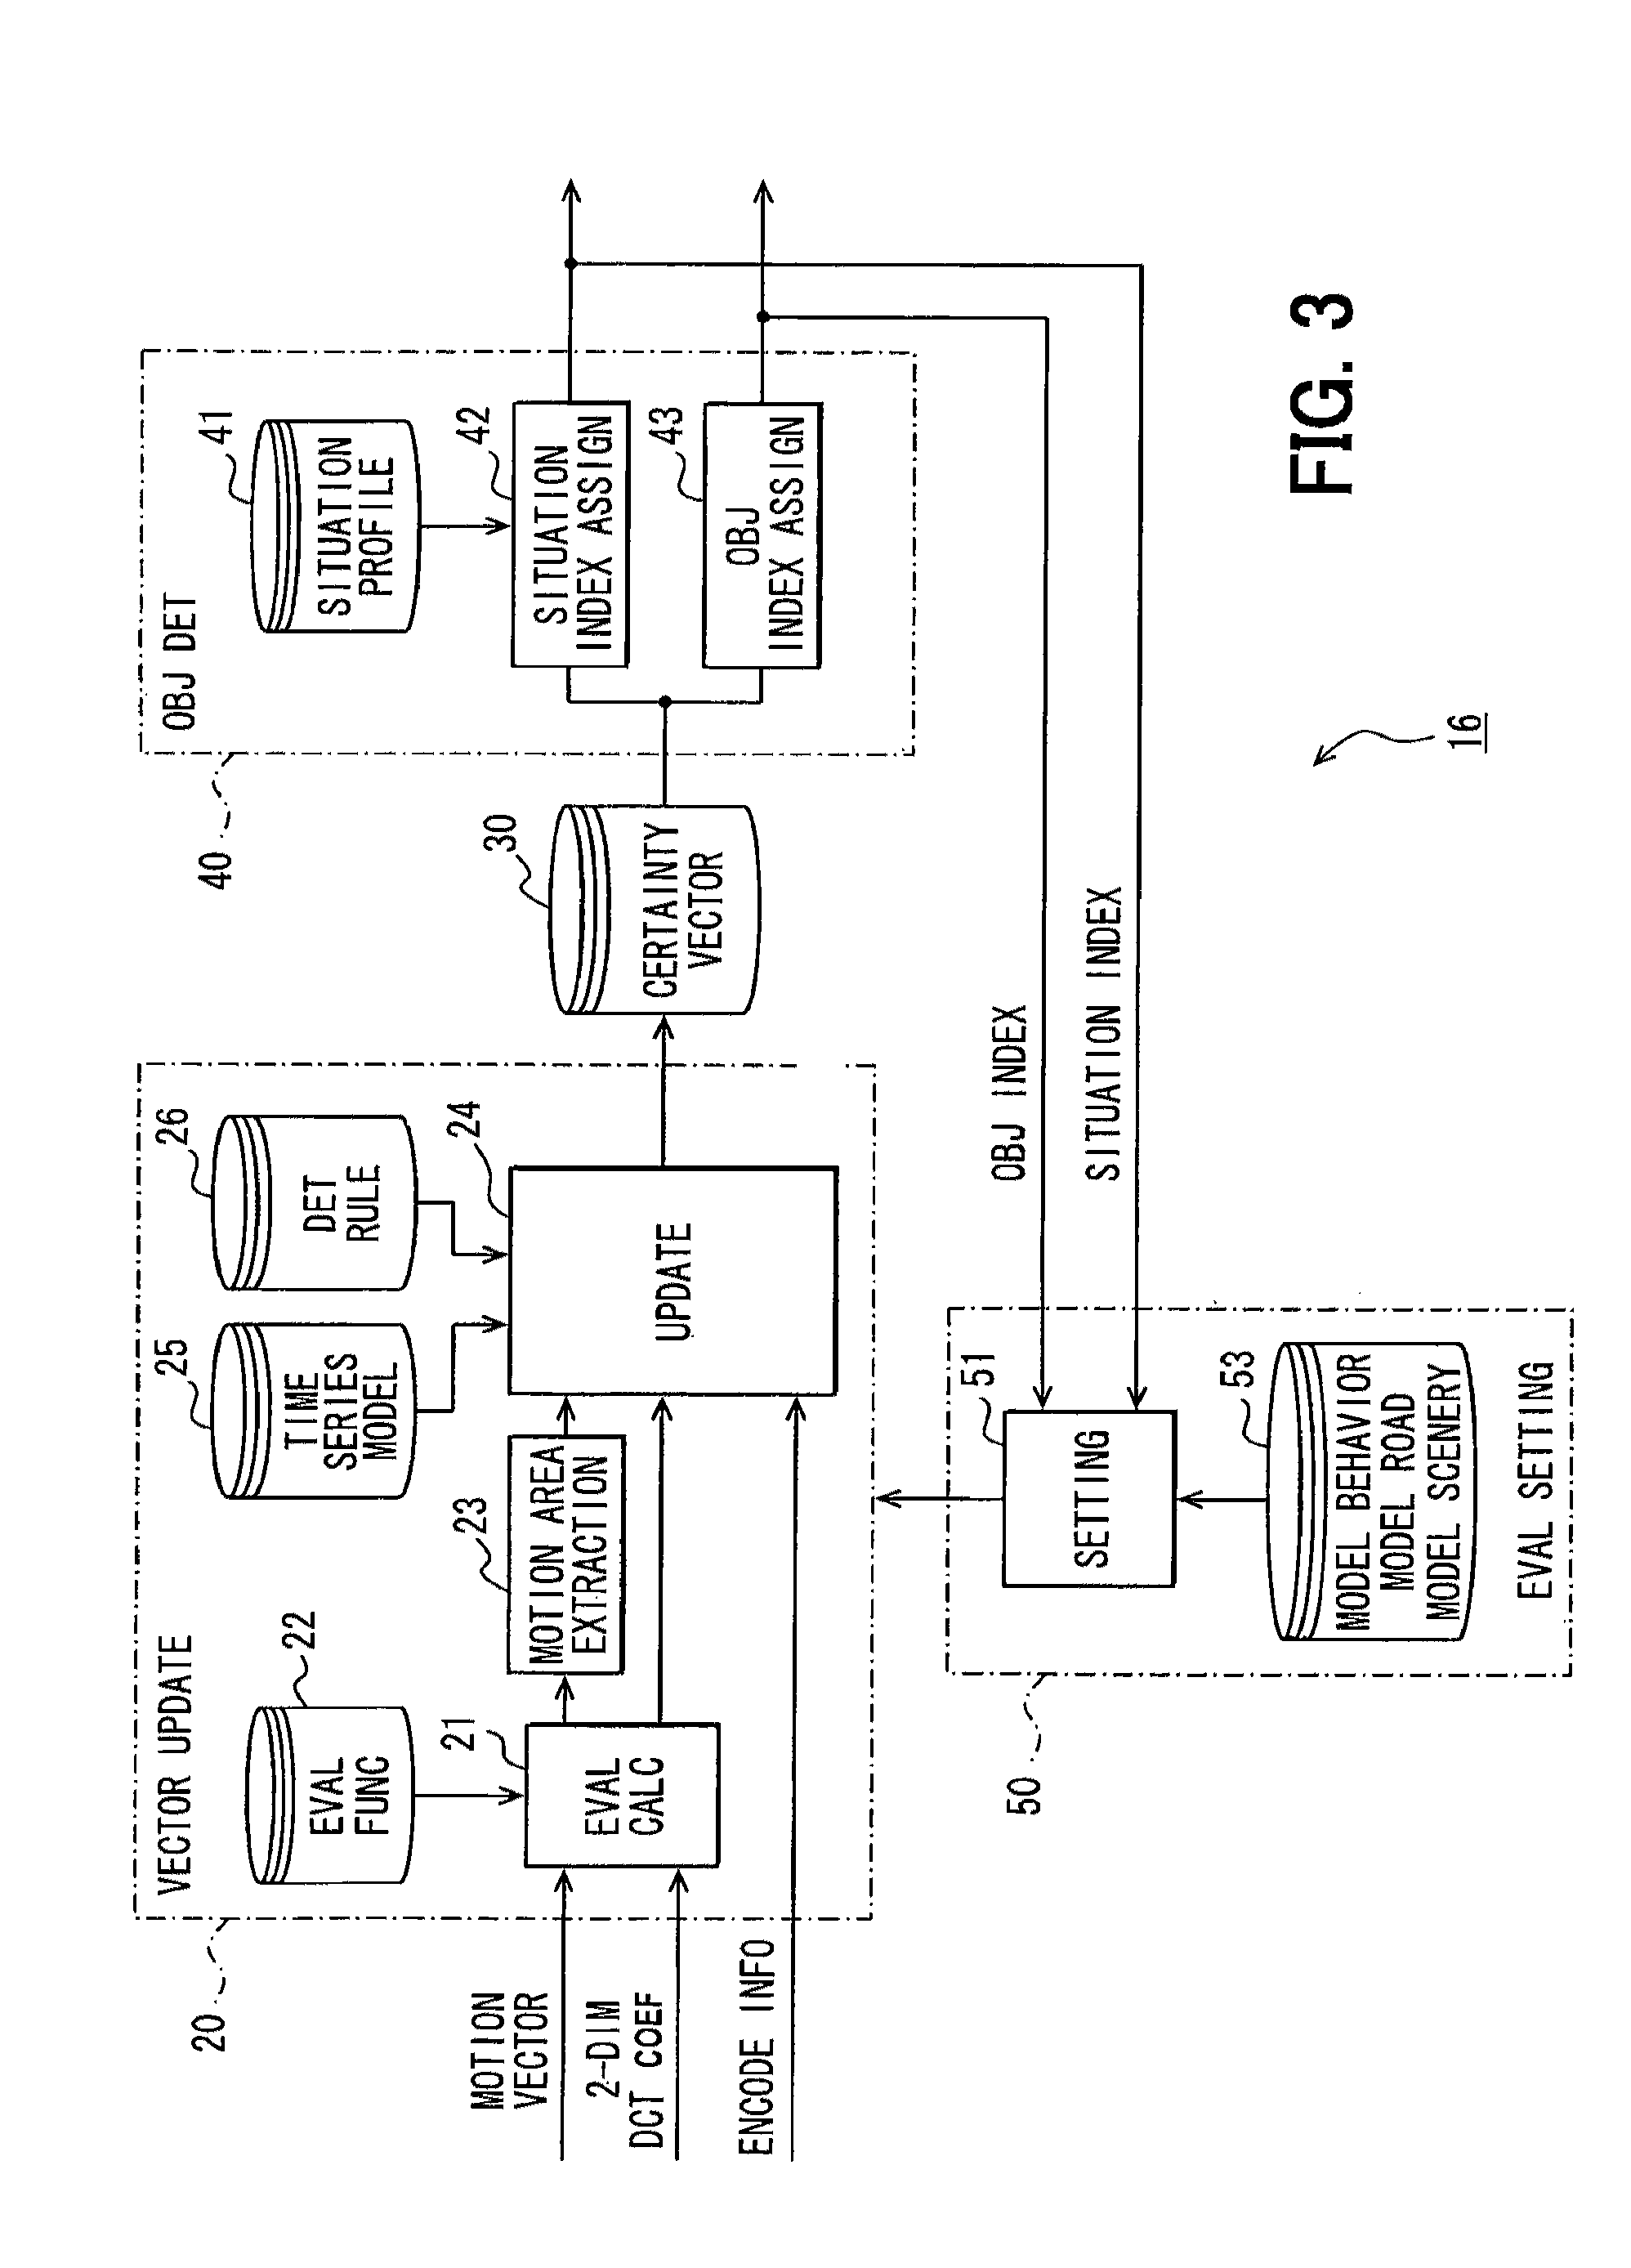 Apparatus for image recognition